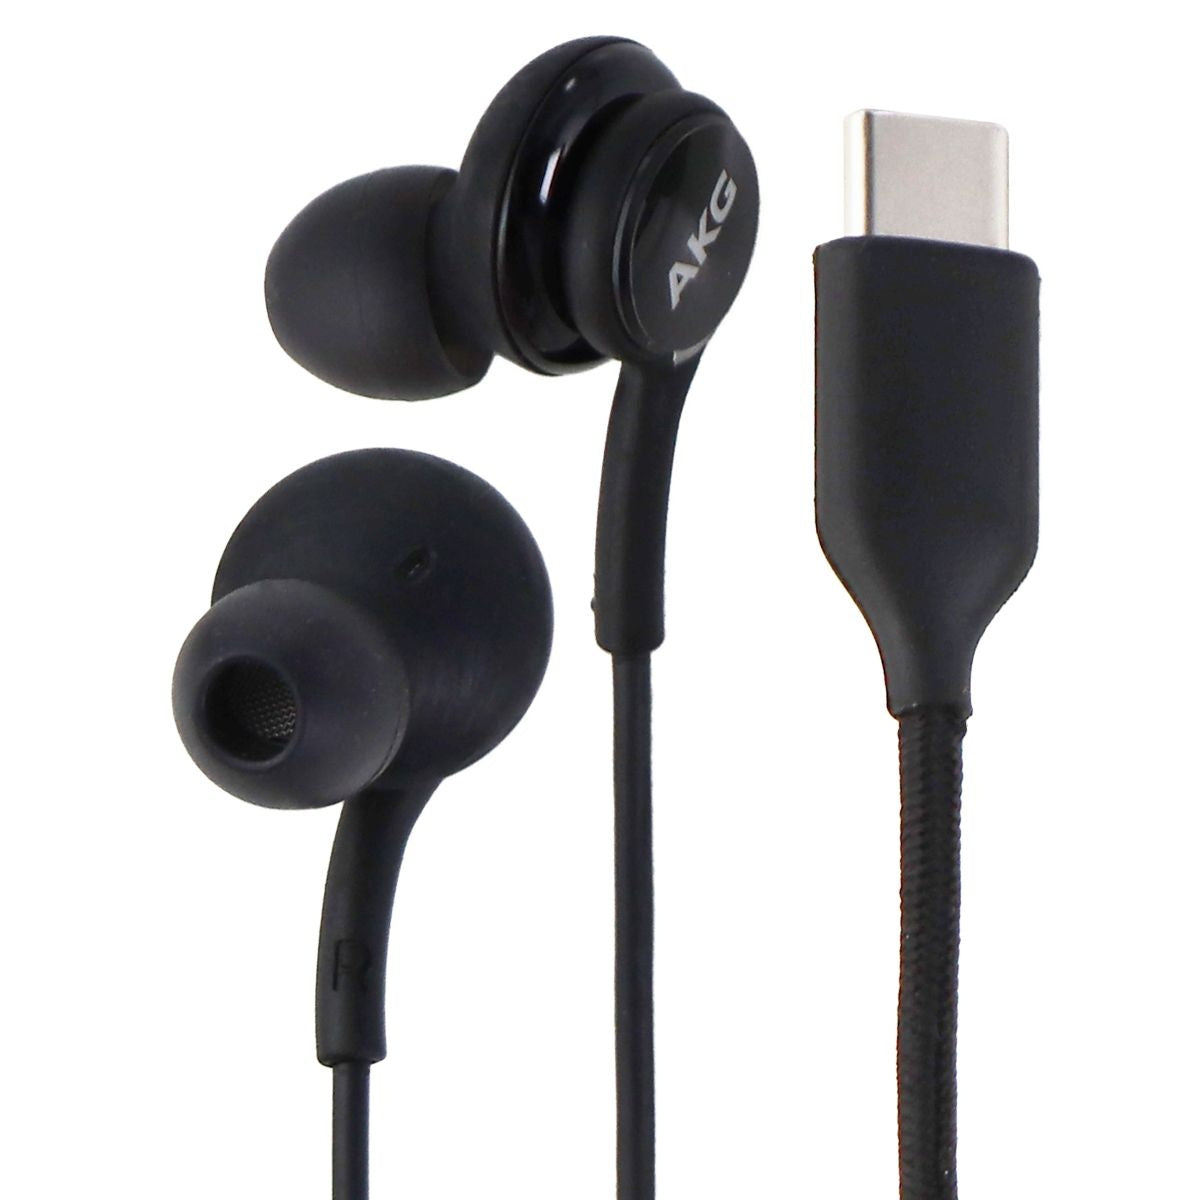 Samsung AKG Stereo Earbud USB-C Headset with In-Line Mic - Black (GH59-15150A) Portable Audio - Headphones Samsung    - Simple Cell Bulk Wholesale Pricing - USA Seller